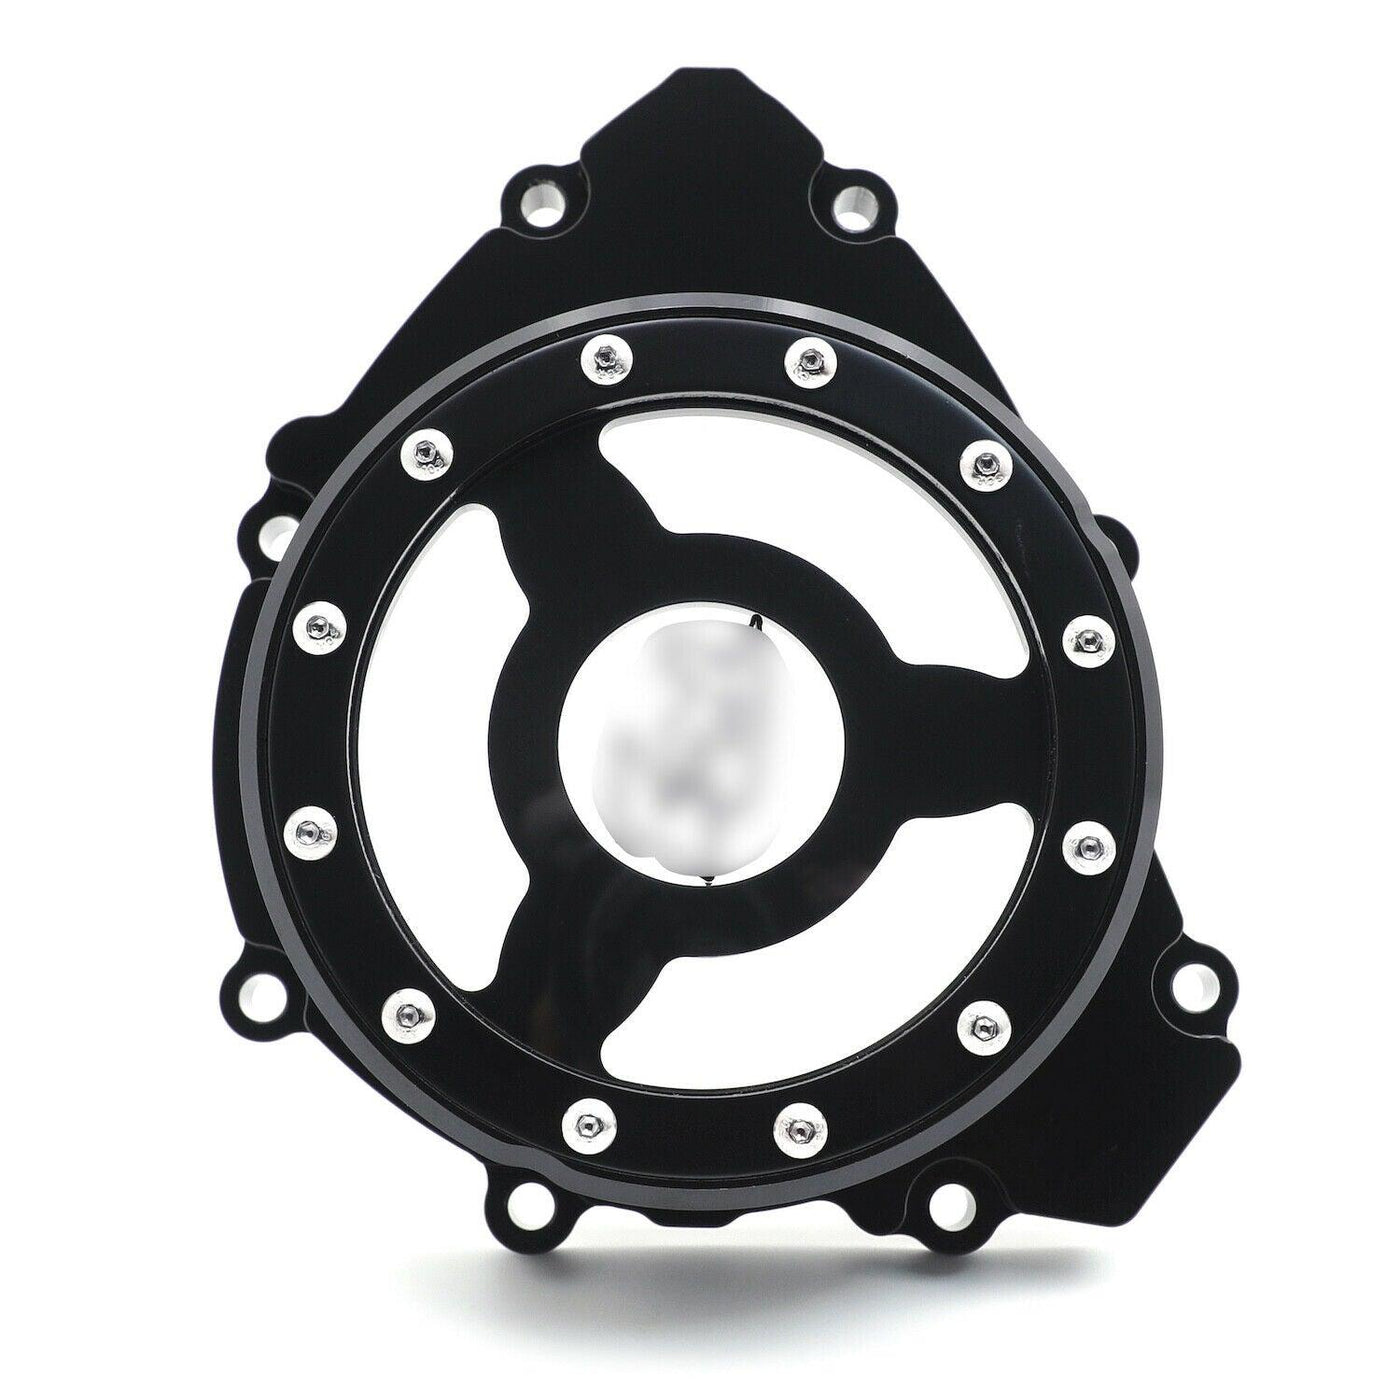 Black Clear Stator Engine Cover Crankcase Case Left For Yamaha YZF R1 2009-2014 - Moto Life Products